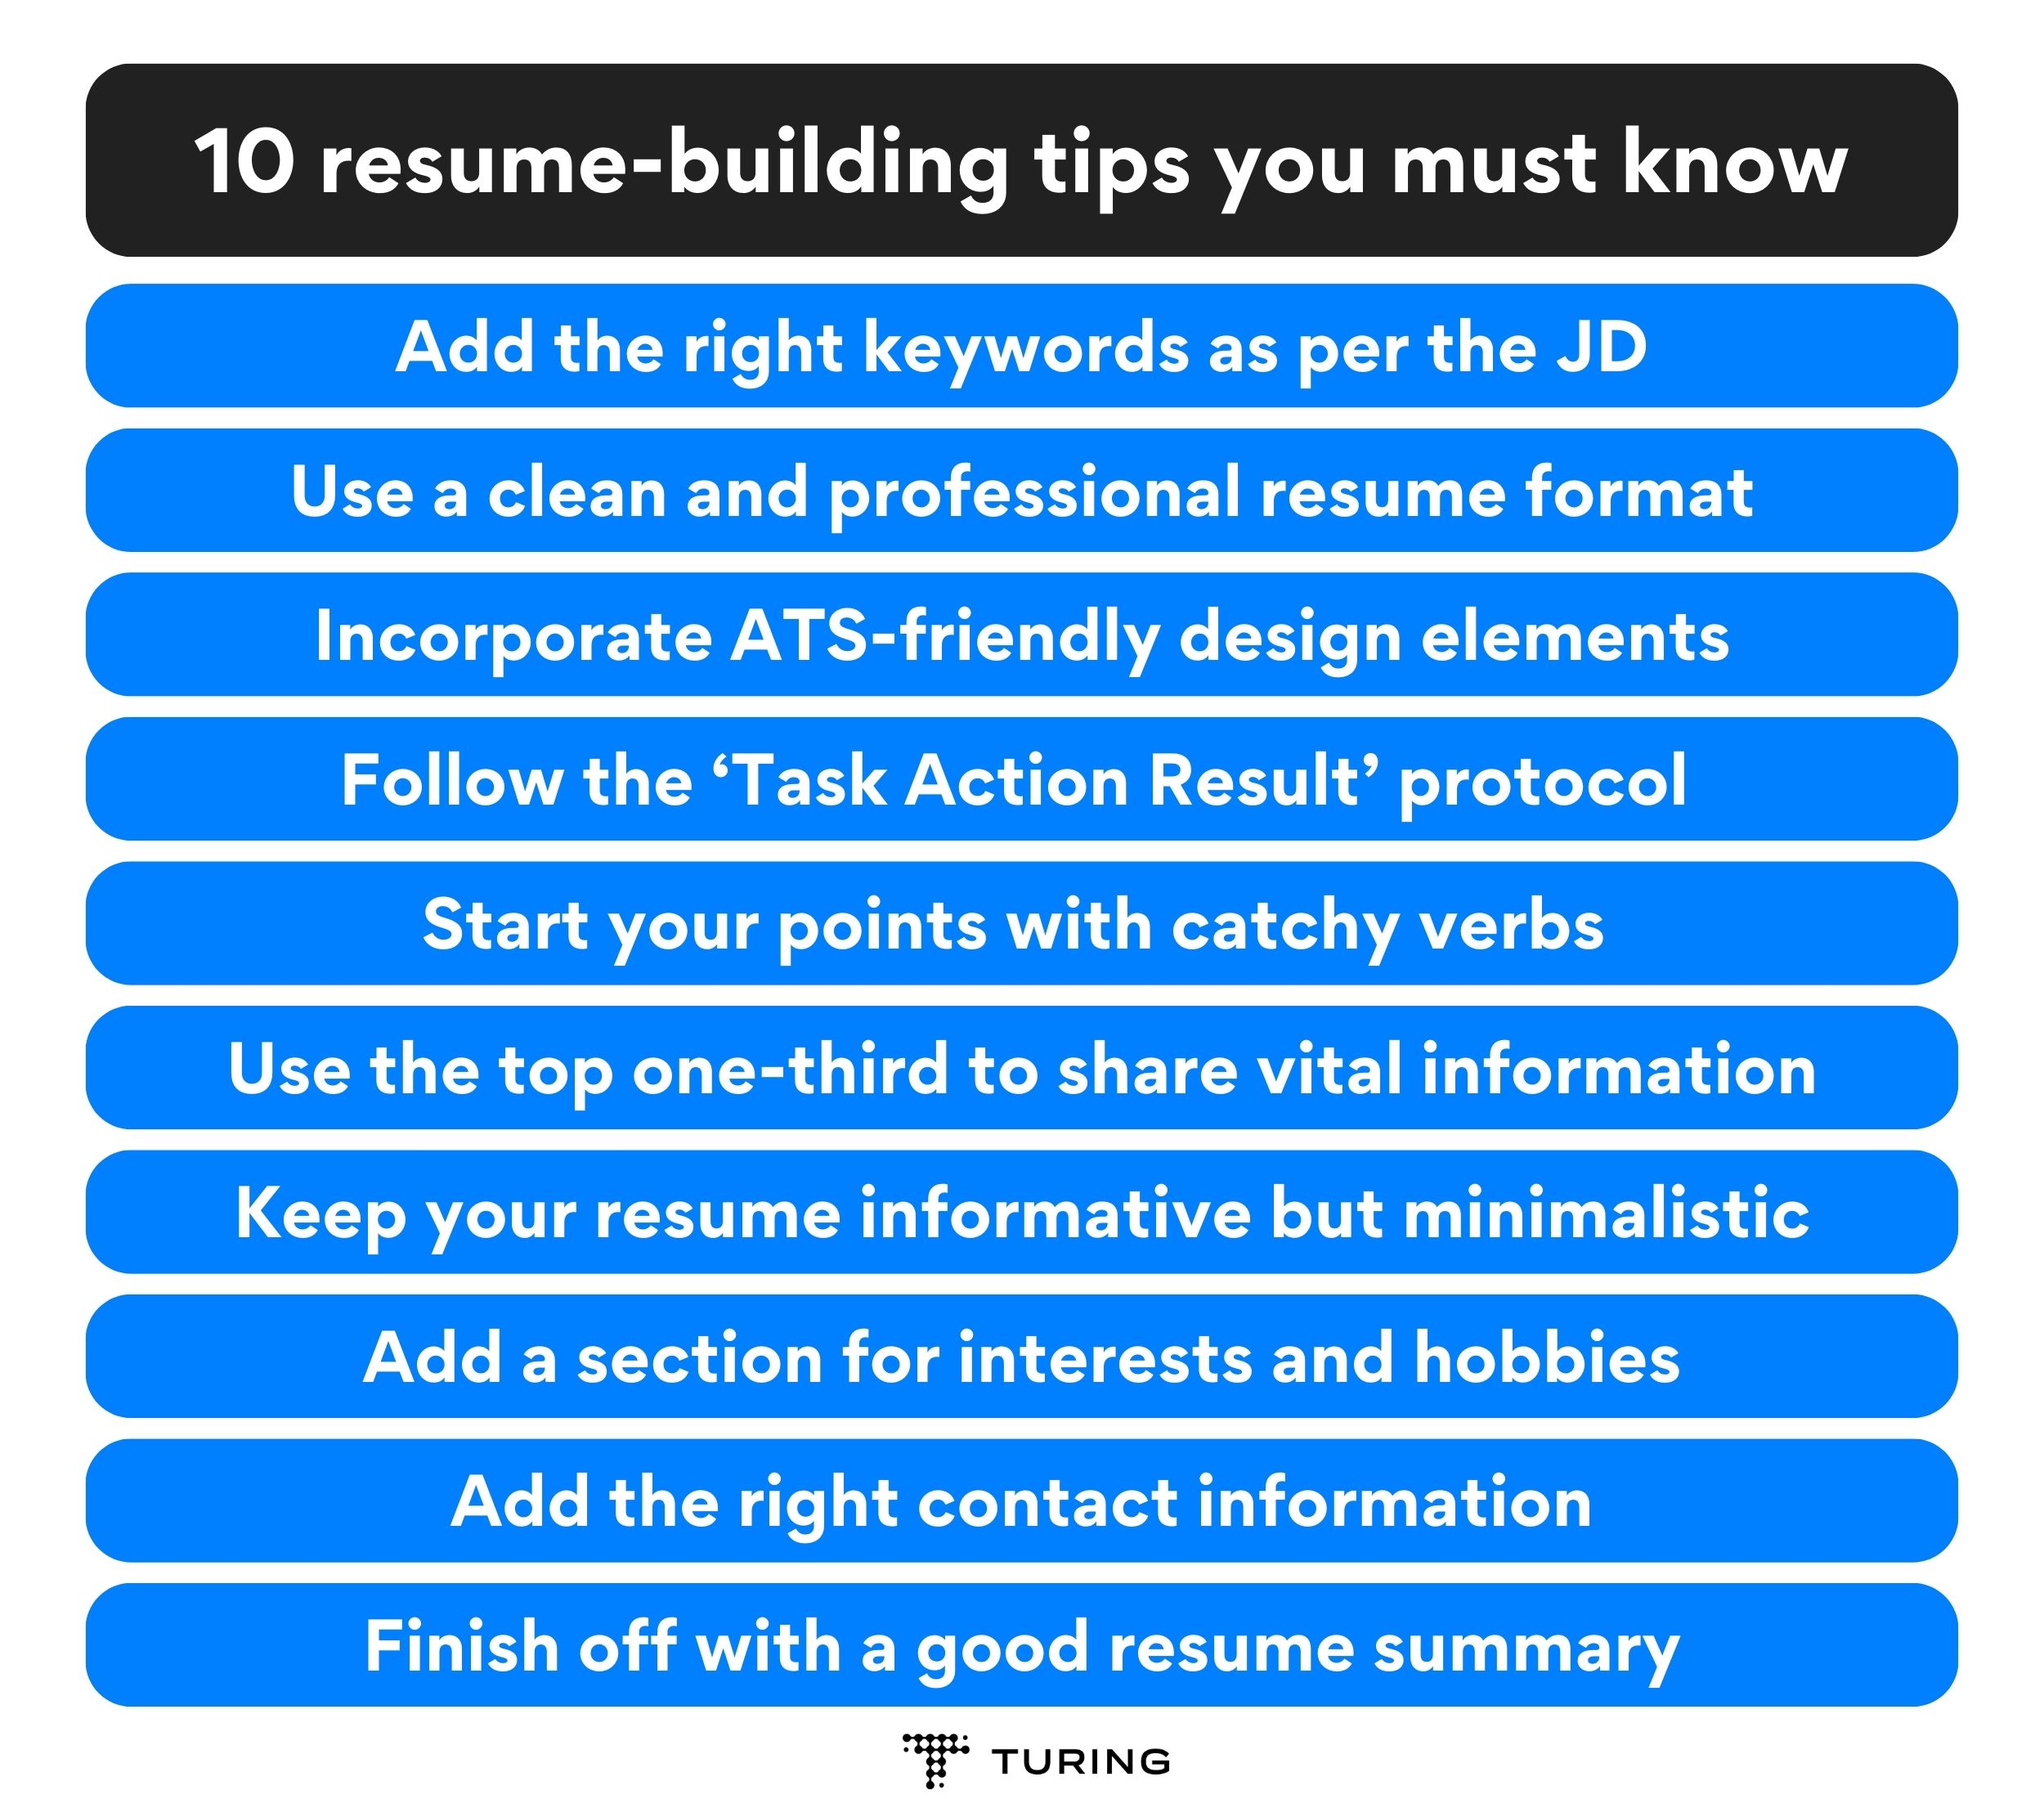 10 resume-building tips you must know